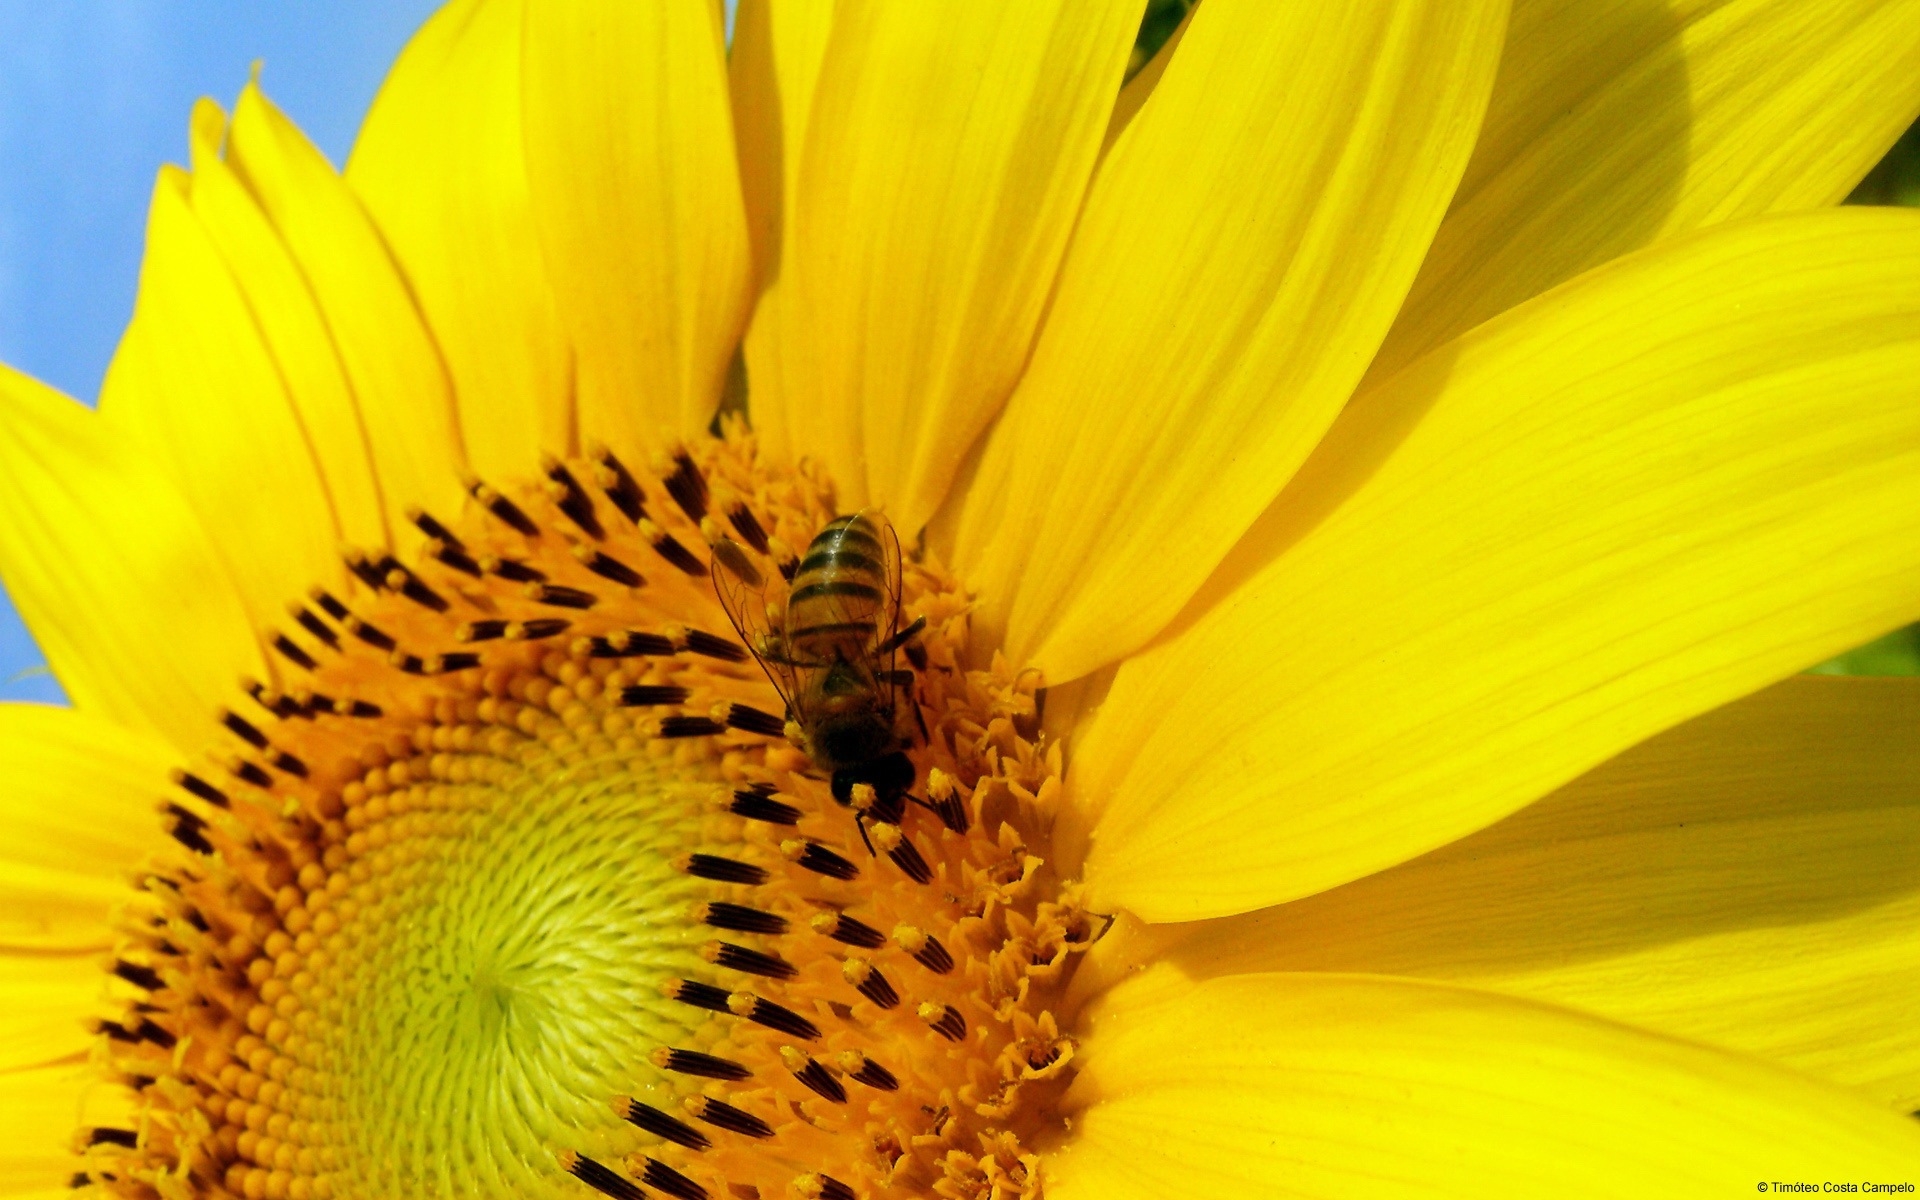 Windows 8 theme wallpaper, insects world #20 - 1920x1200